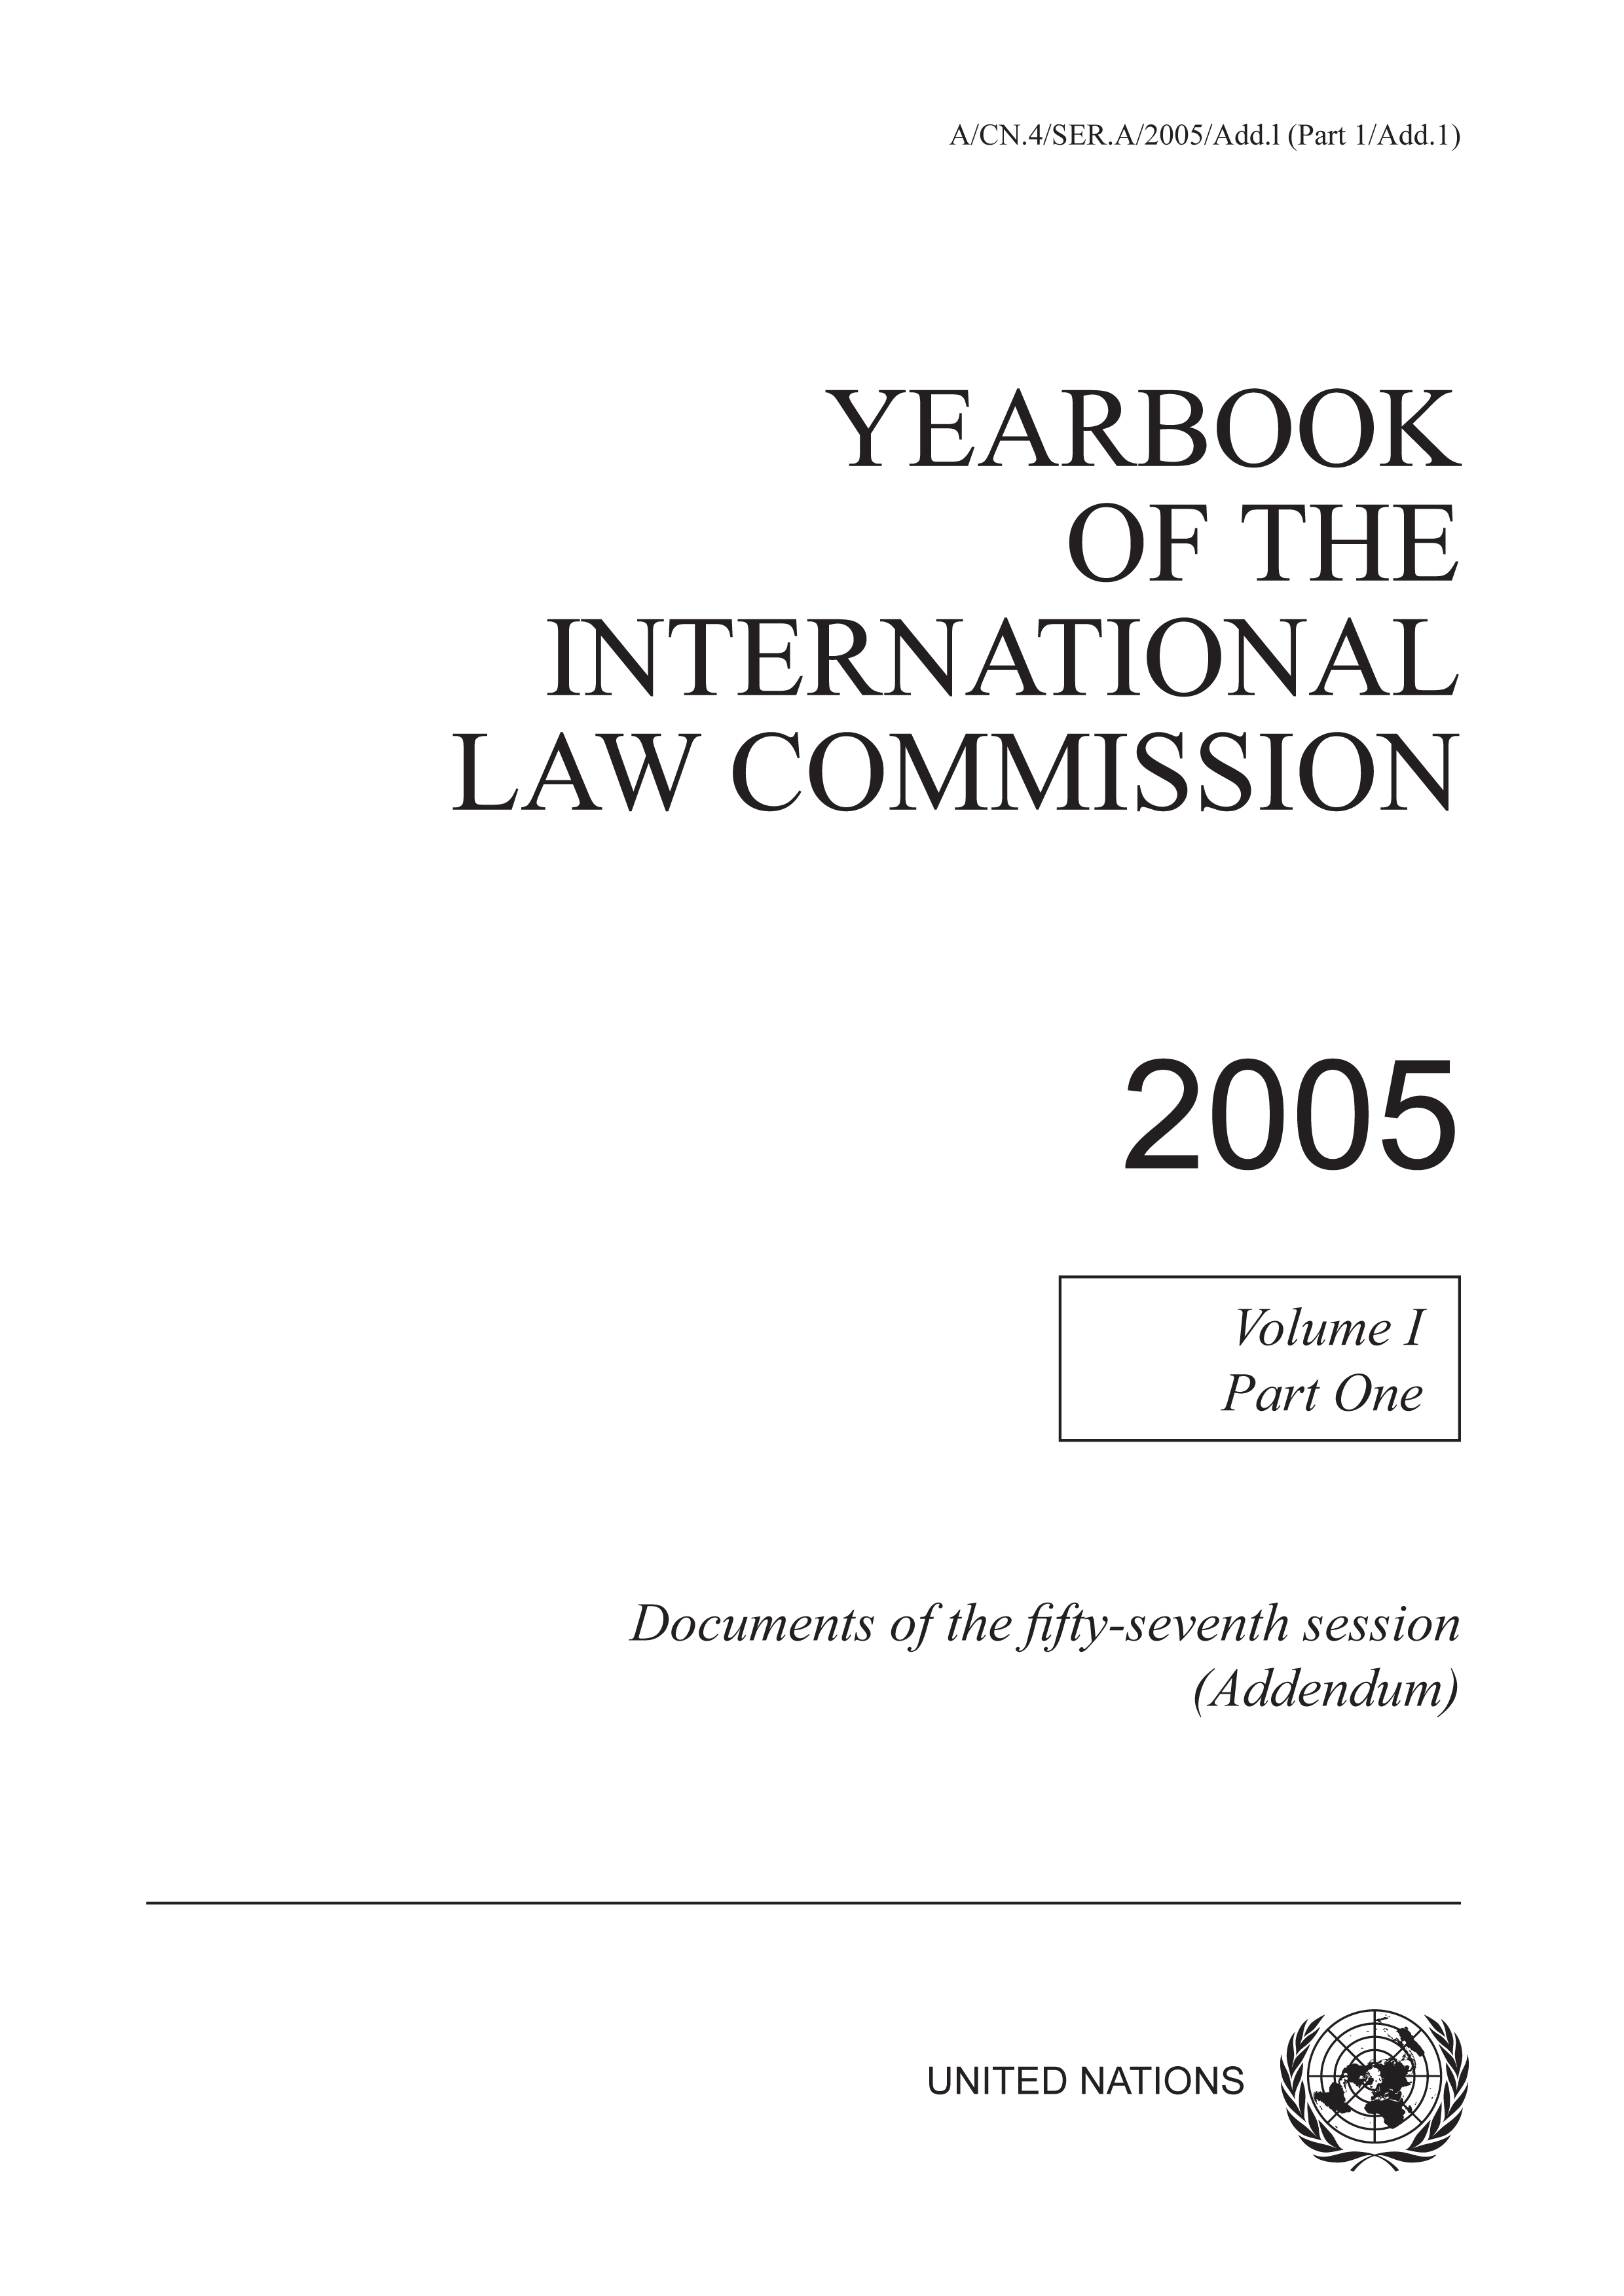 image of Yearbook of the International Law Commission 2005, Vol. II, Part 1 (Addendum)